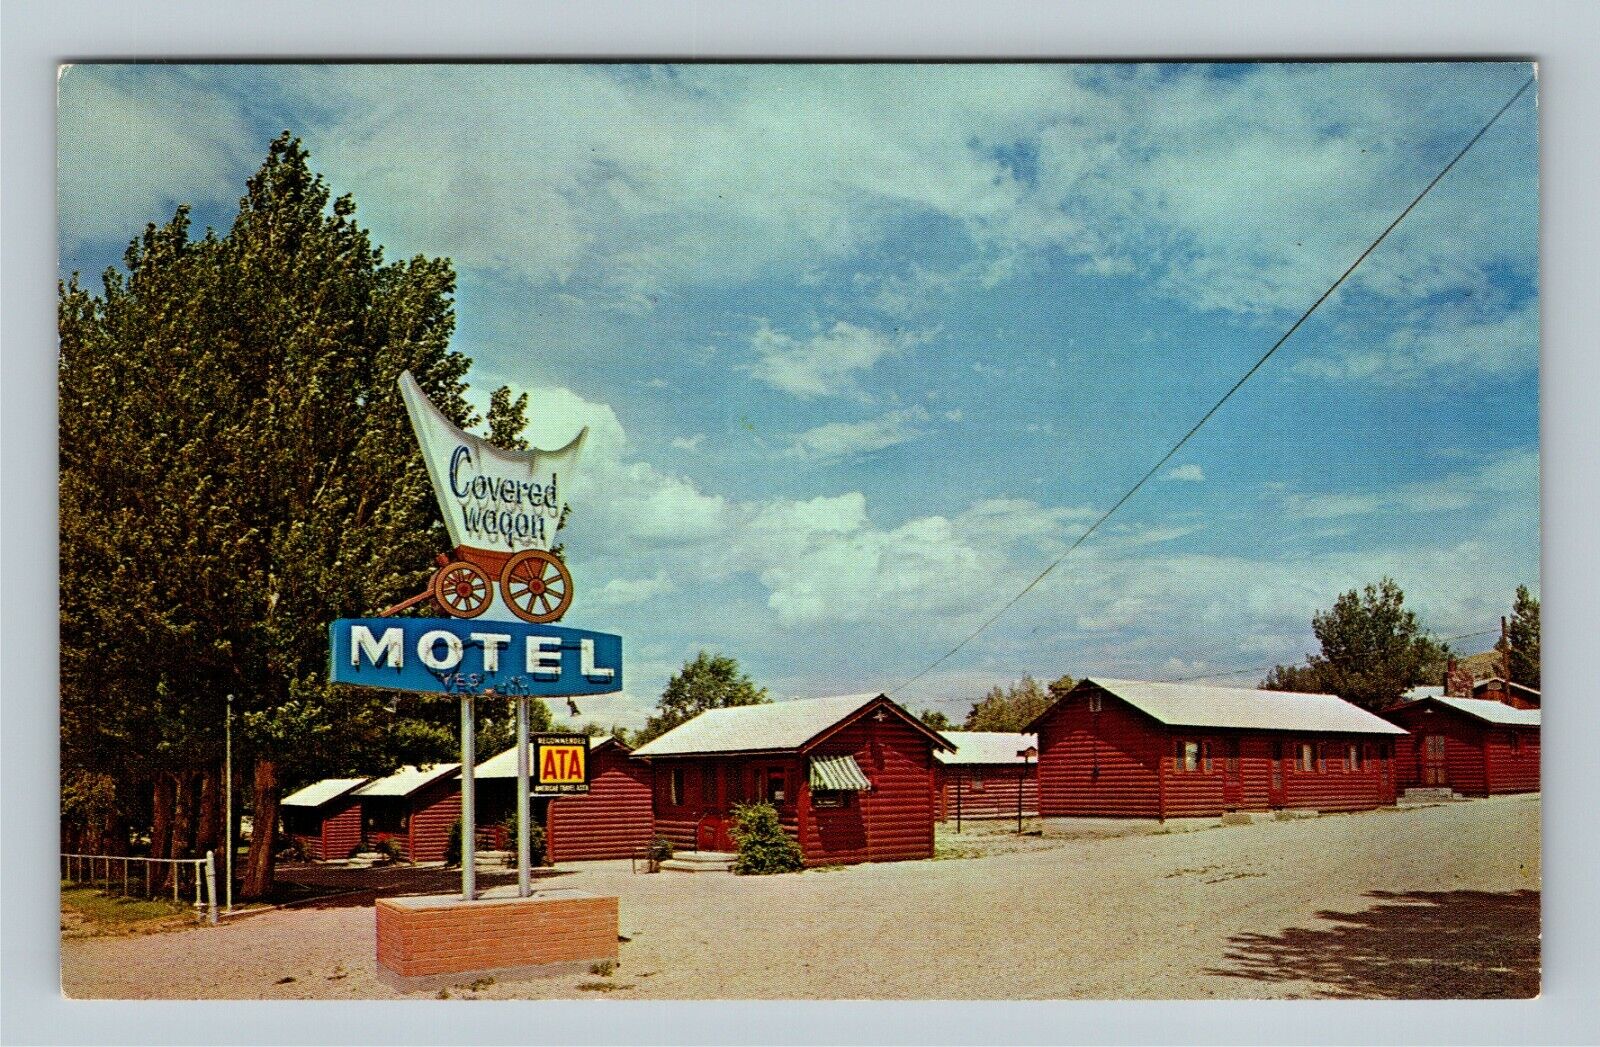 West Cody WY, Covered Wagon Motel Log Cabins Street View Chrome Wyoming Postcard